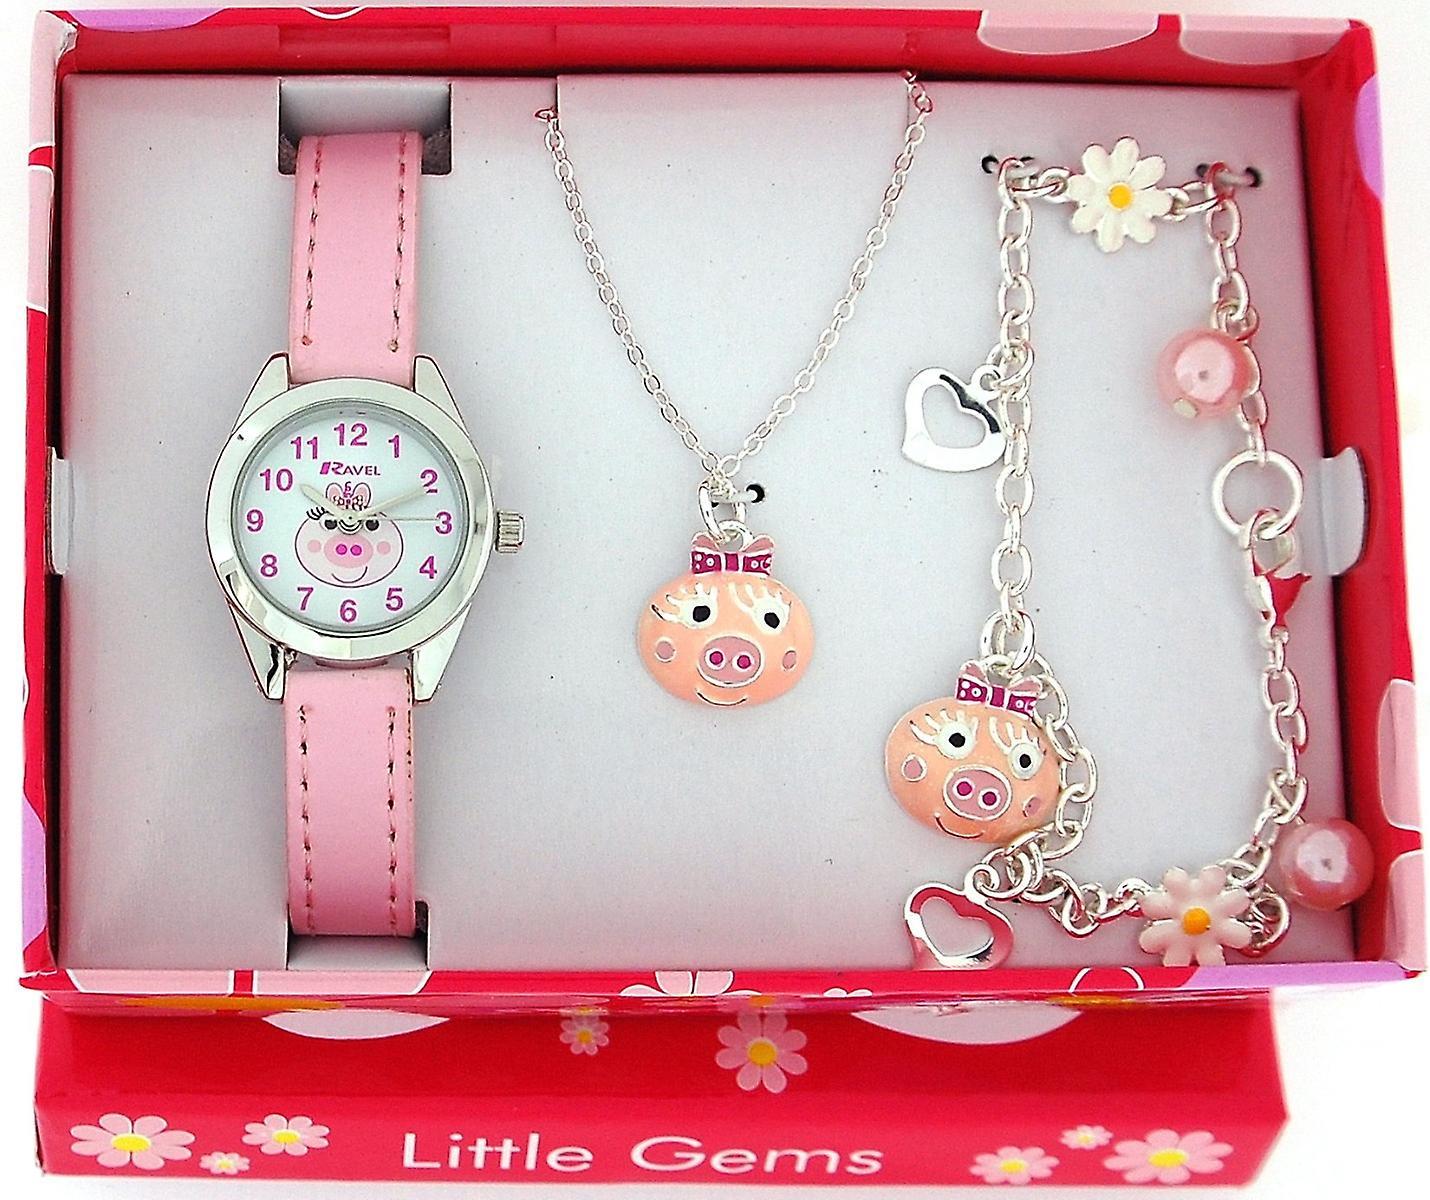 Ravel Girls Little Gems Watch & Jewellery Set Available Multiple Design R22 - CLEARANCE NEEDS RE-BATTERY